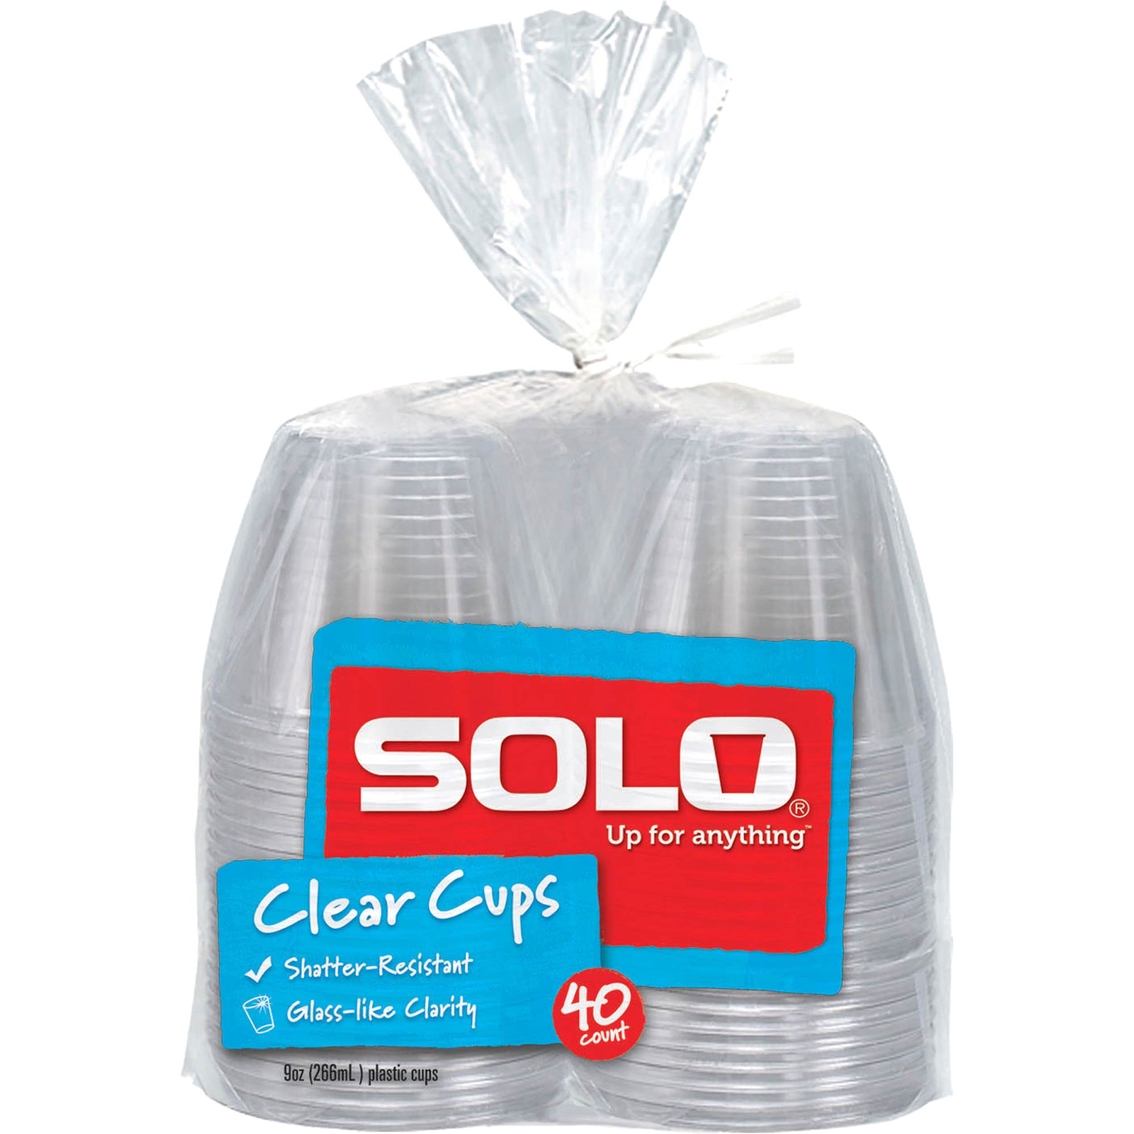 Solo 9 Oz. Plastic Clear Cups 40 Pk., Disposable Tableware & Napkins, Household